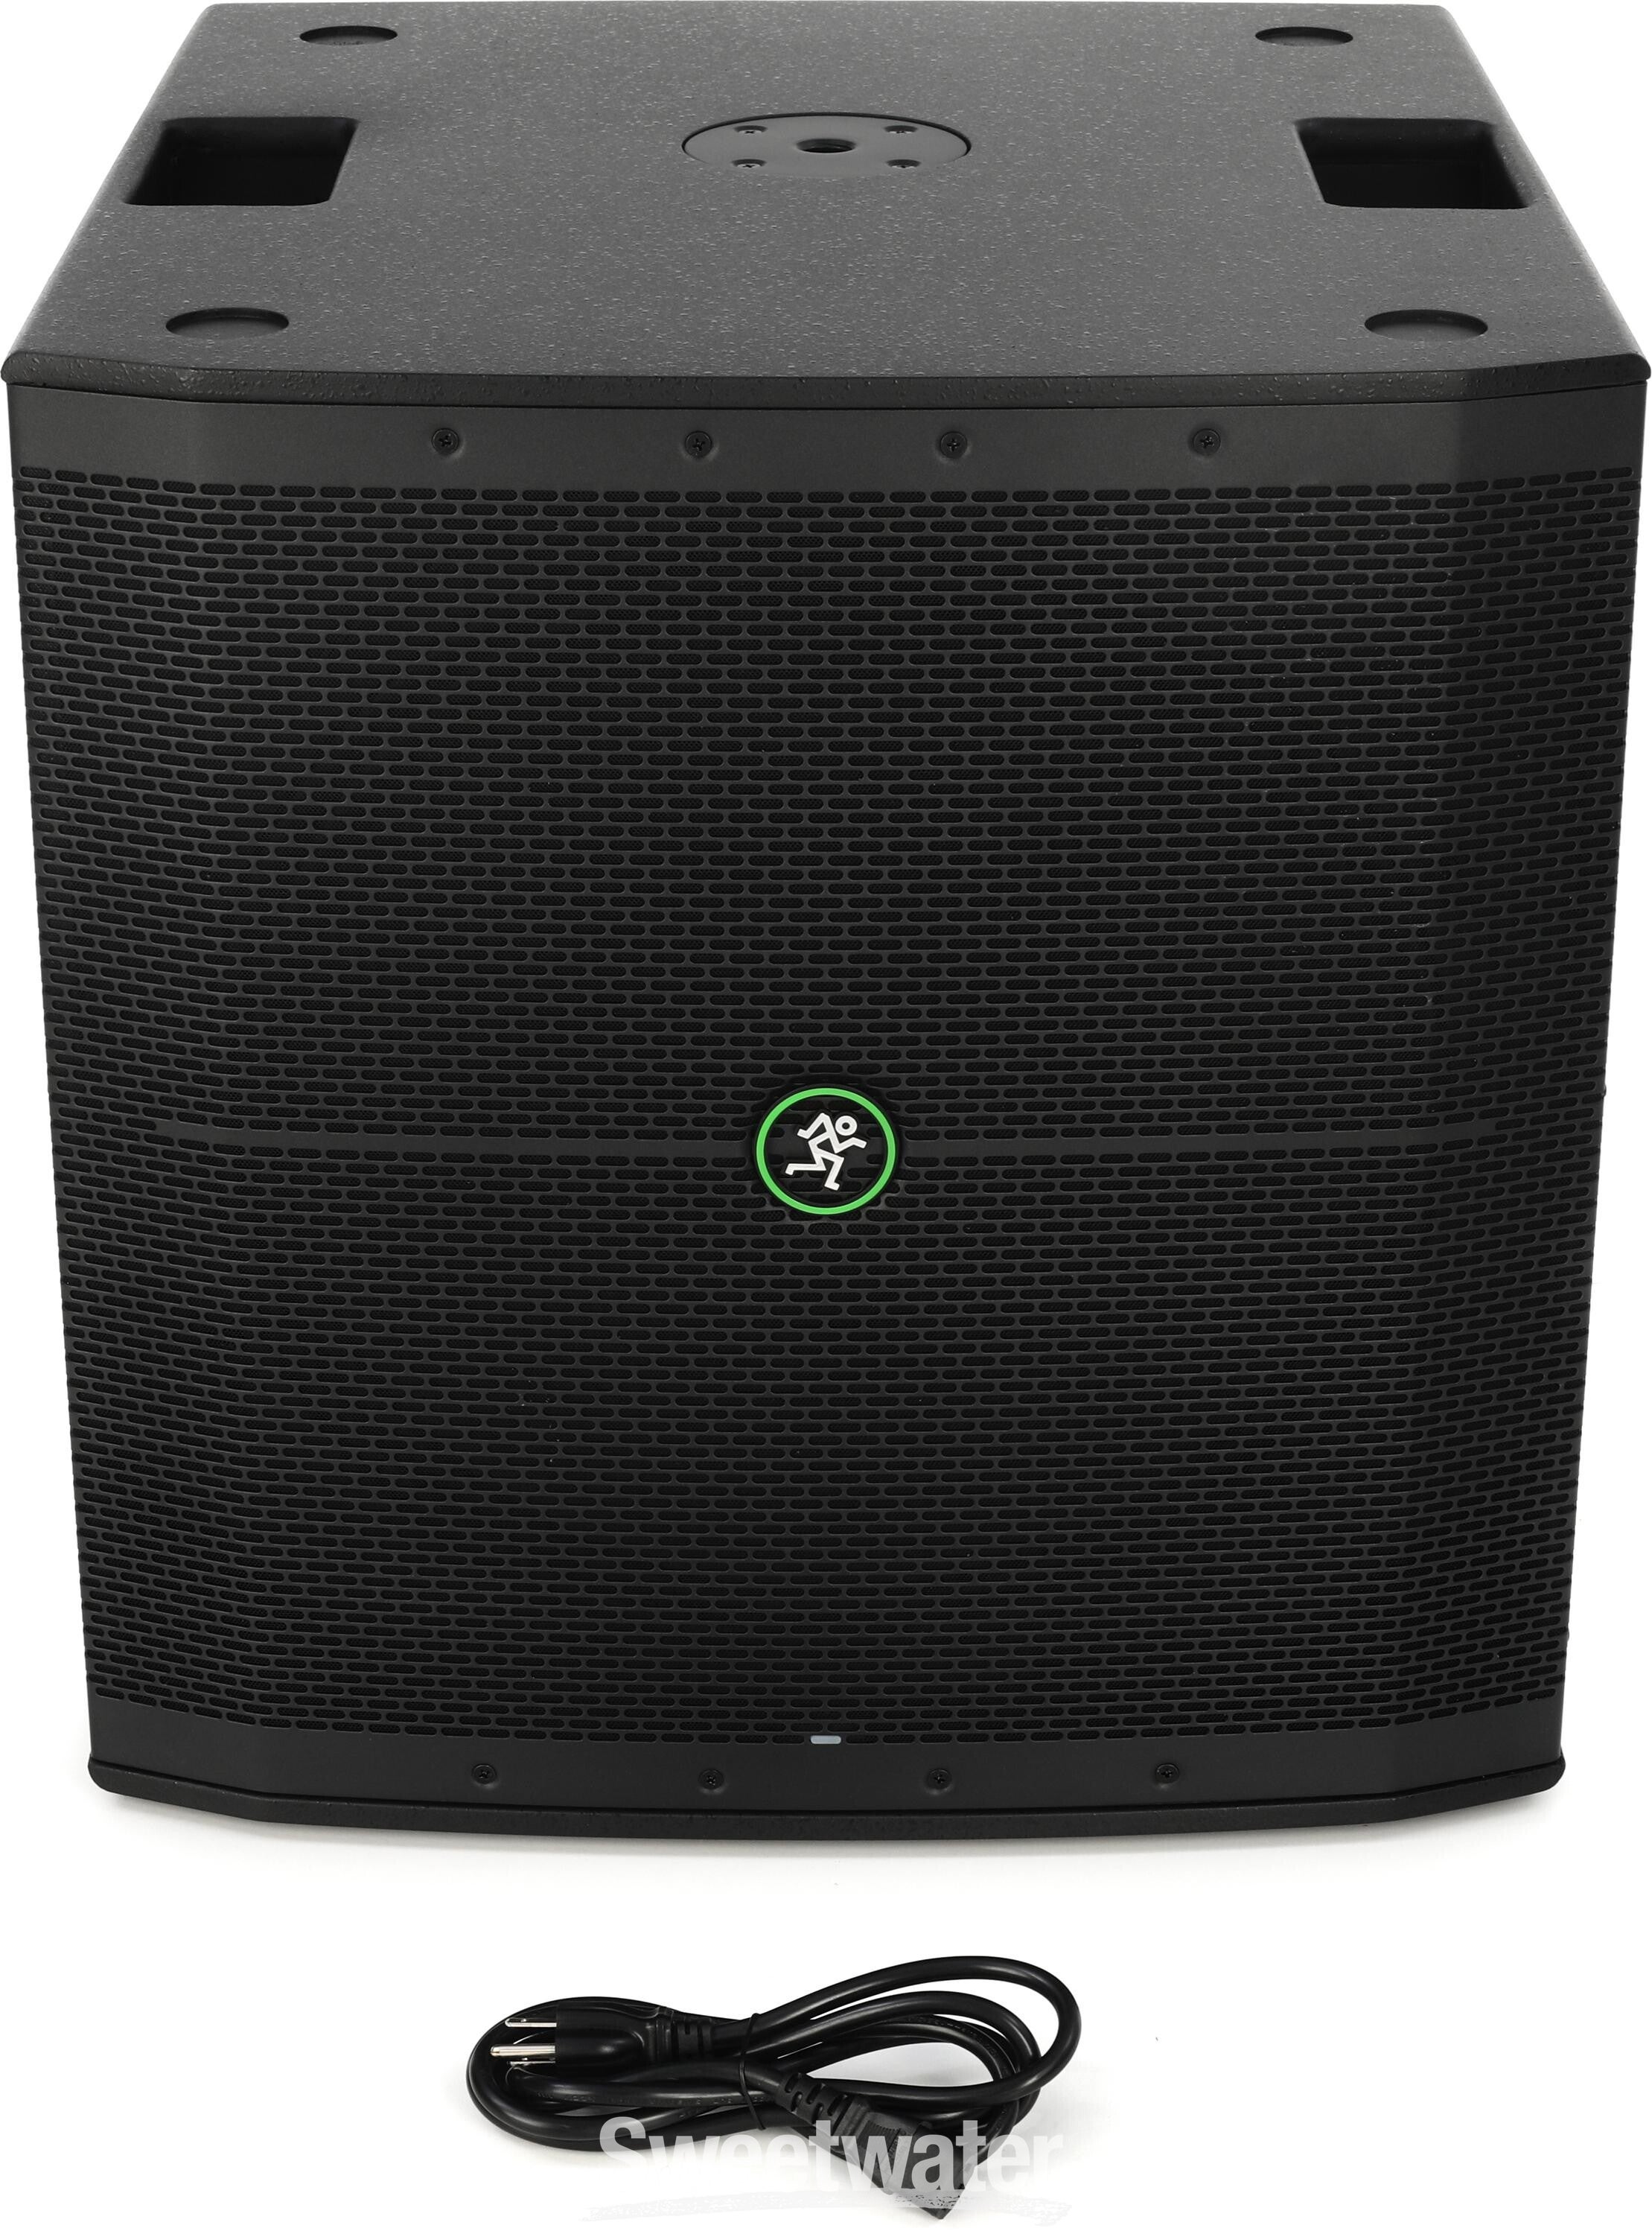 Mackie Thump118S 1,400-watt 18-inch Powered Subwoofer | Sweetwater